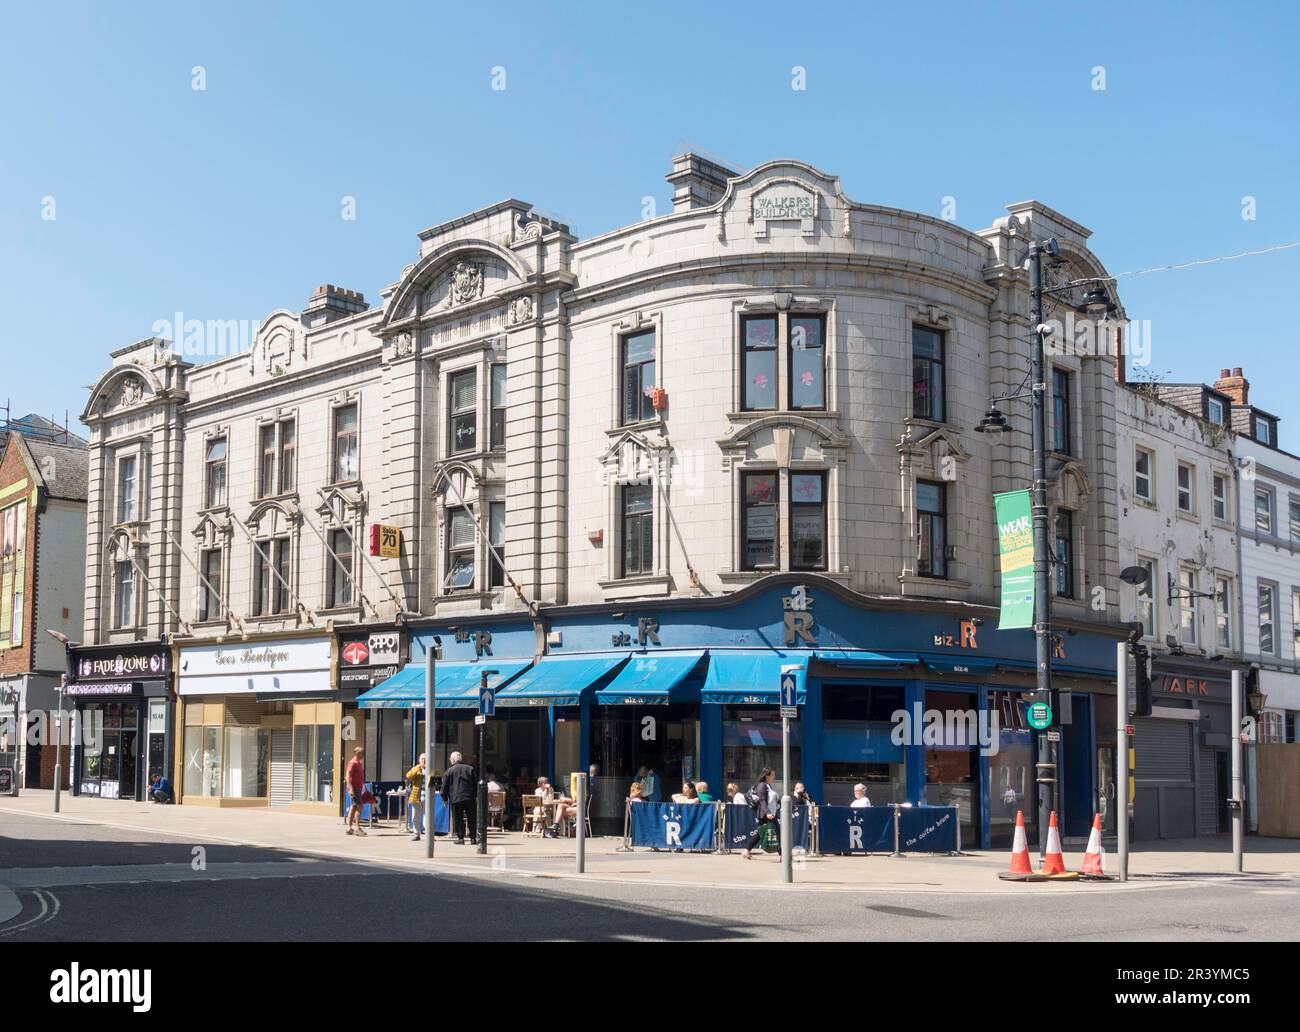 People sitting outside Biz-R Café in Walker's Buildings, 1920s architecture in Sunderland, North East England, UK Stock Photo